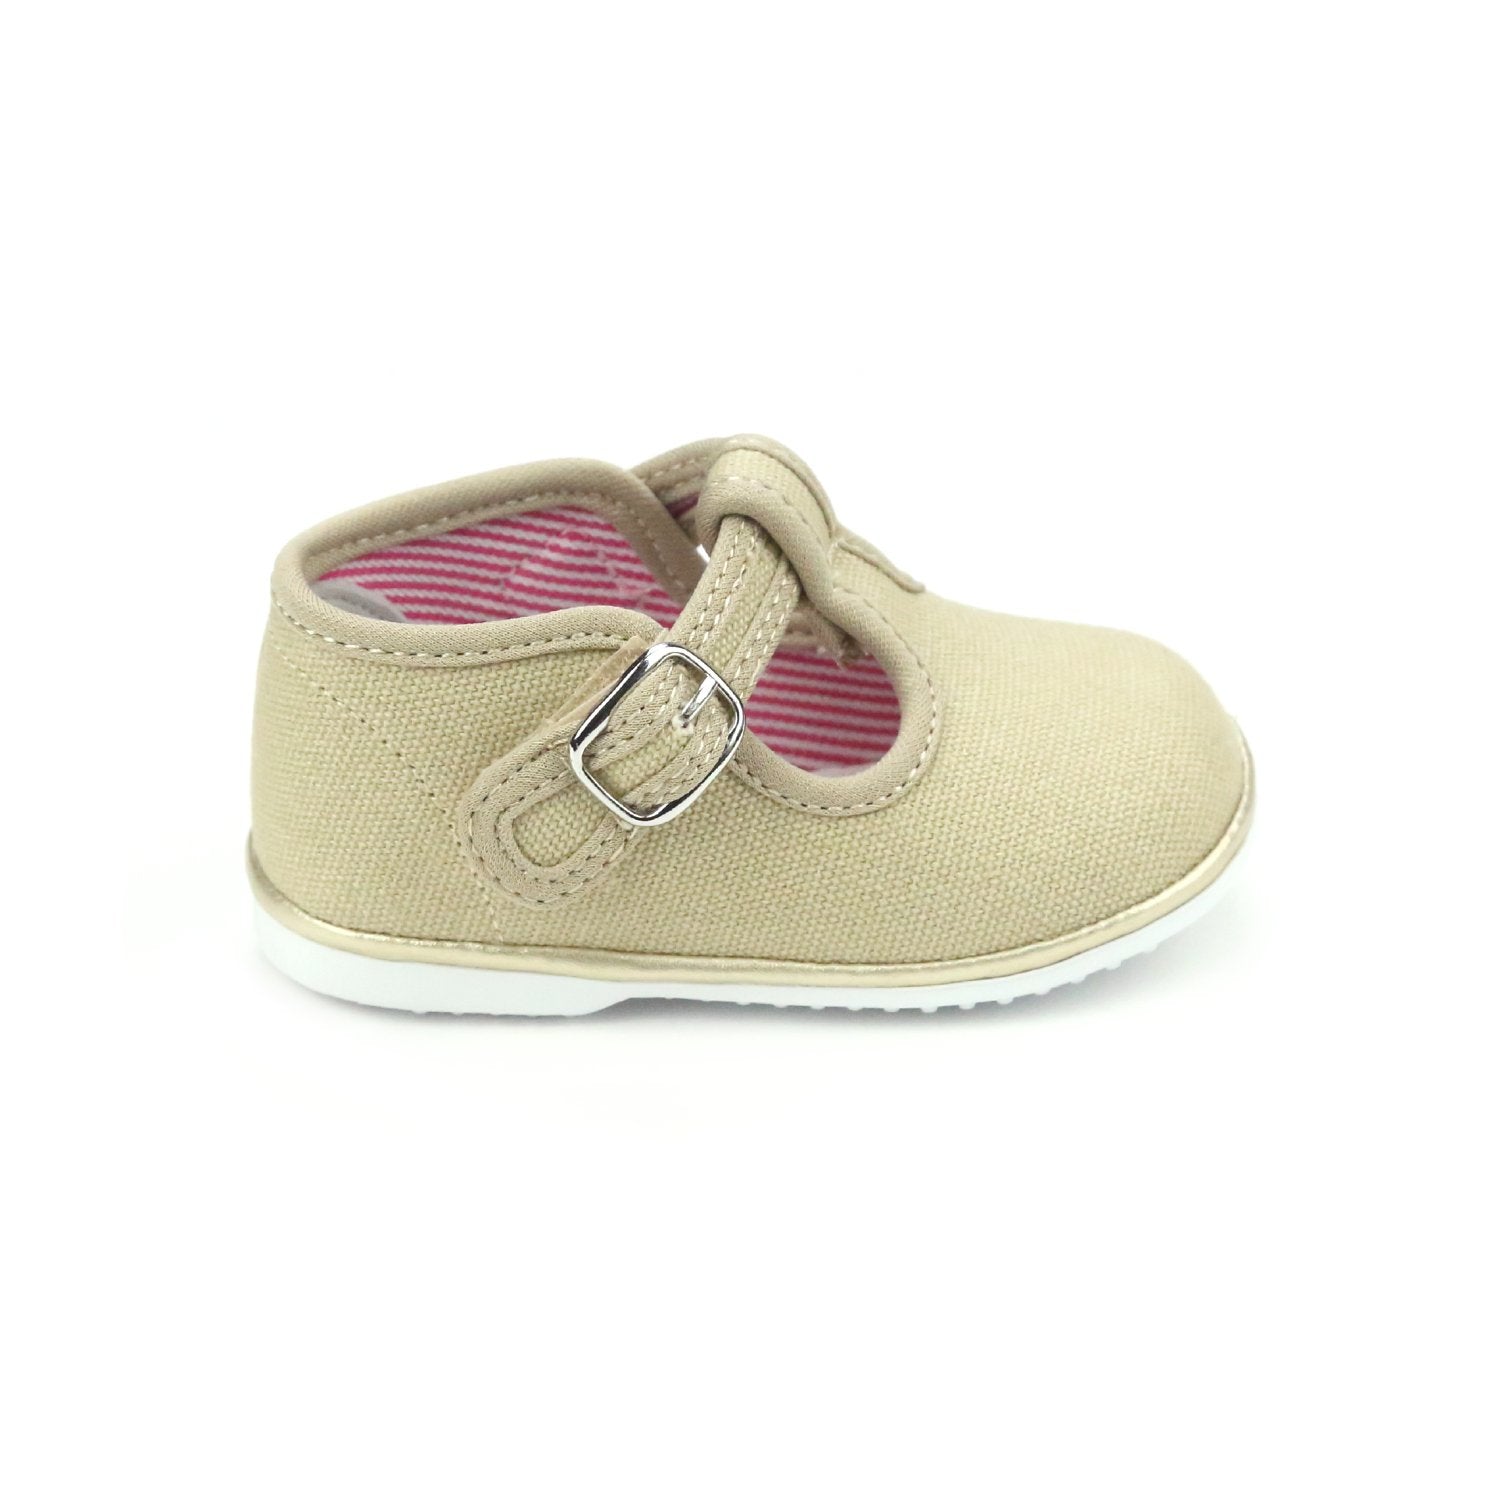 Poppy Canvas T-Strap Mary Jane - Babies & Toddlers